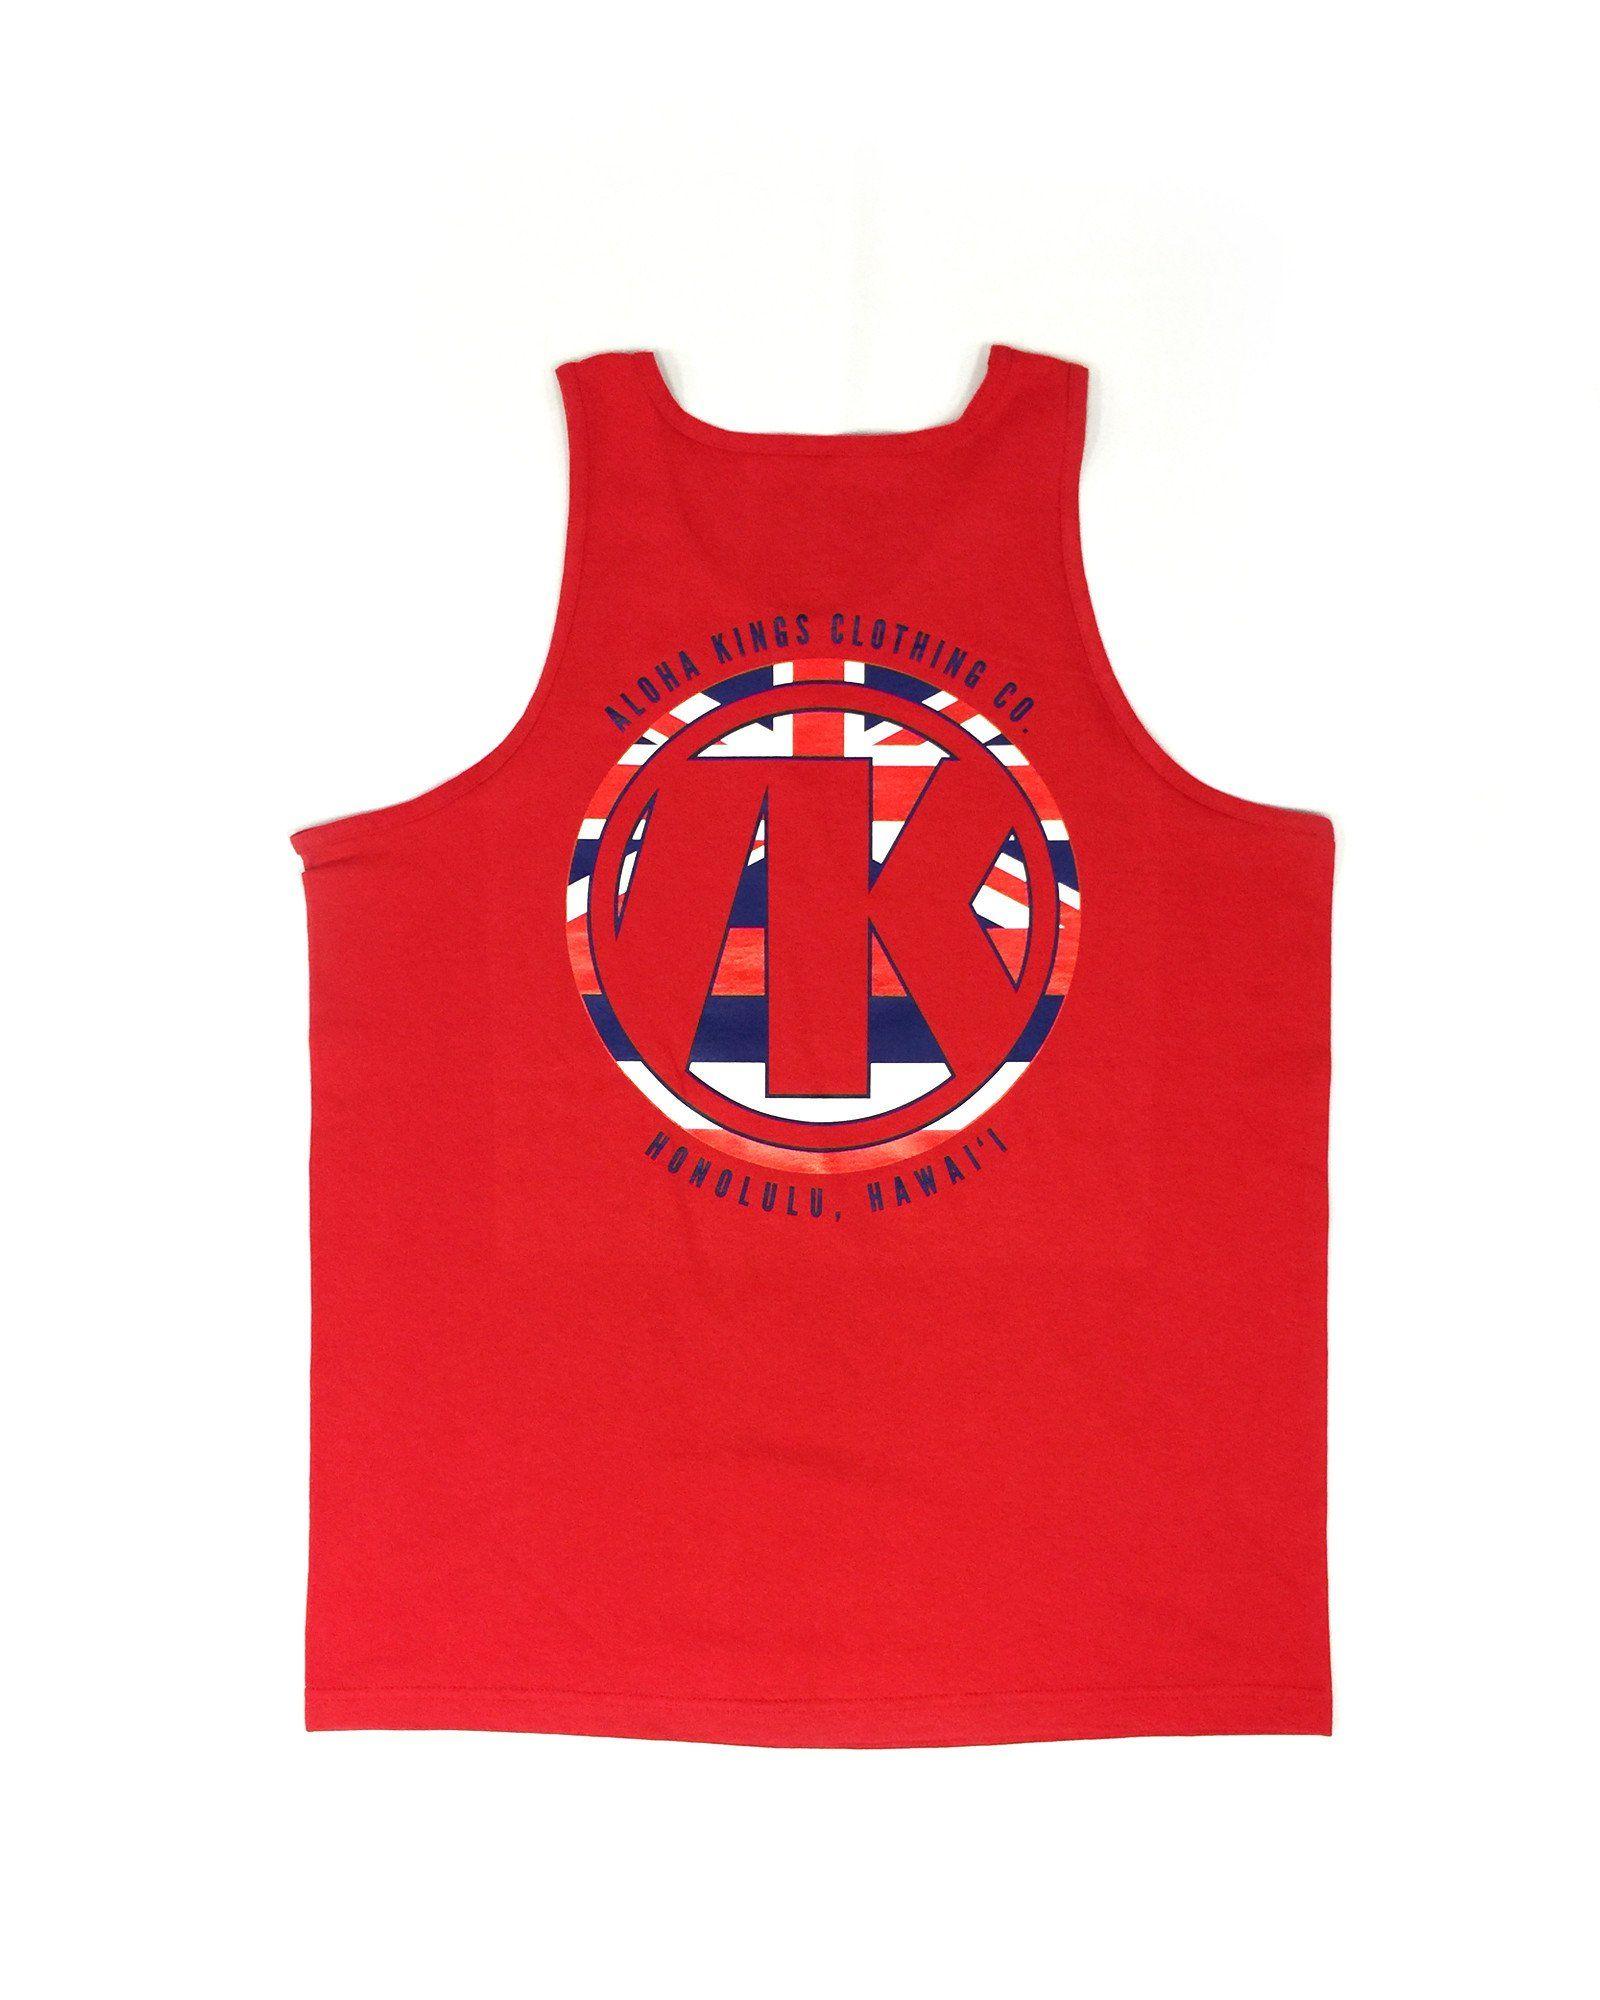 Product Red White and Blue Sports Logo - Red White Blue: Red Tank